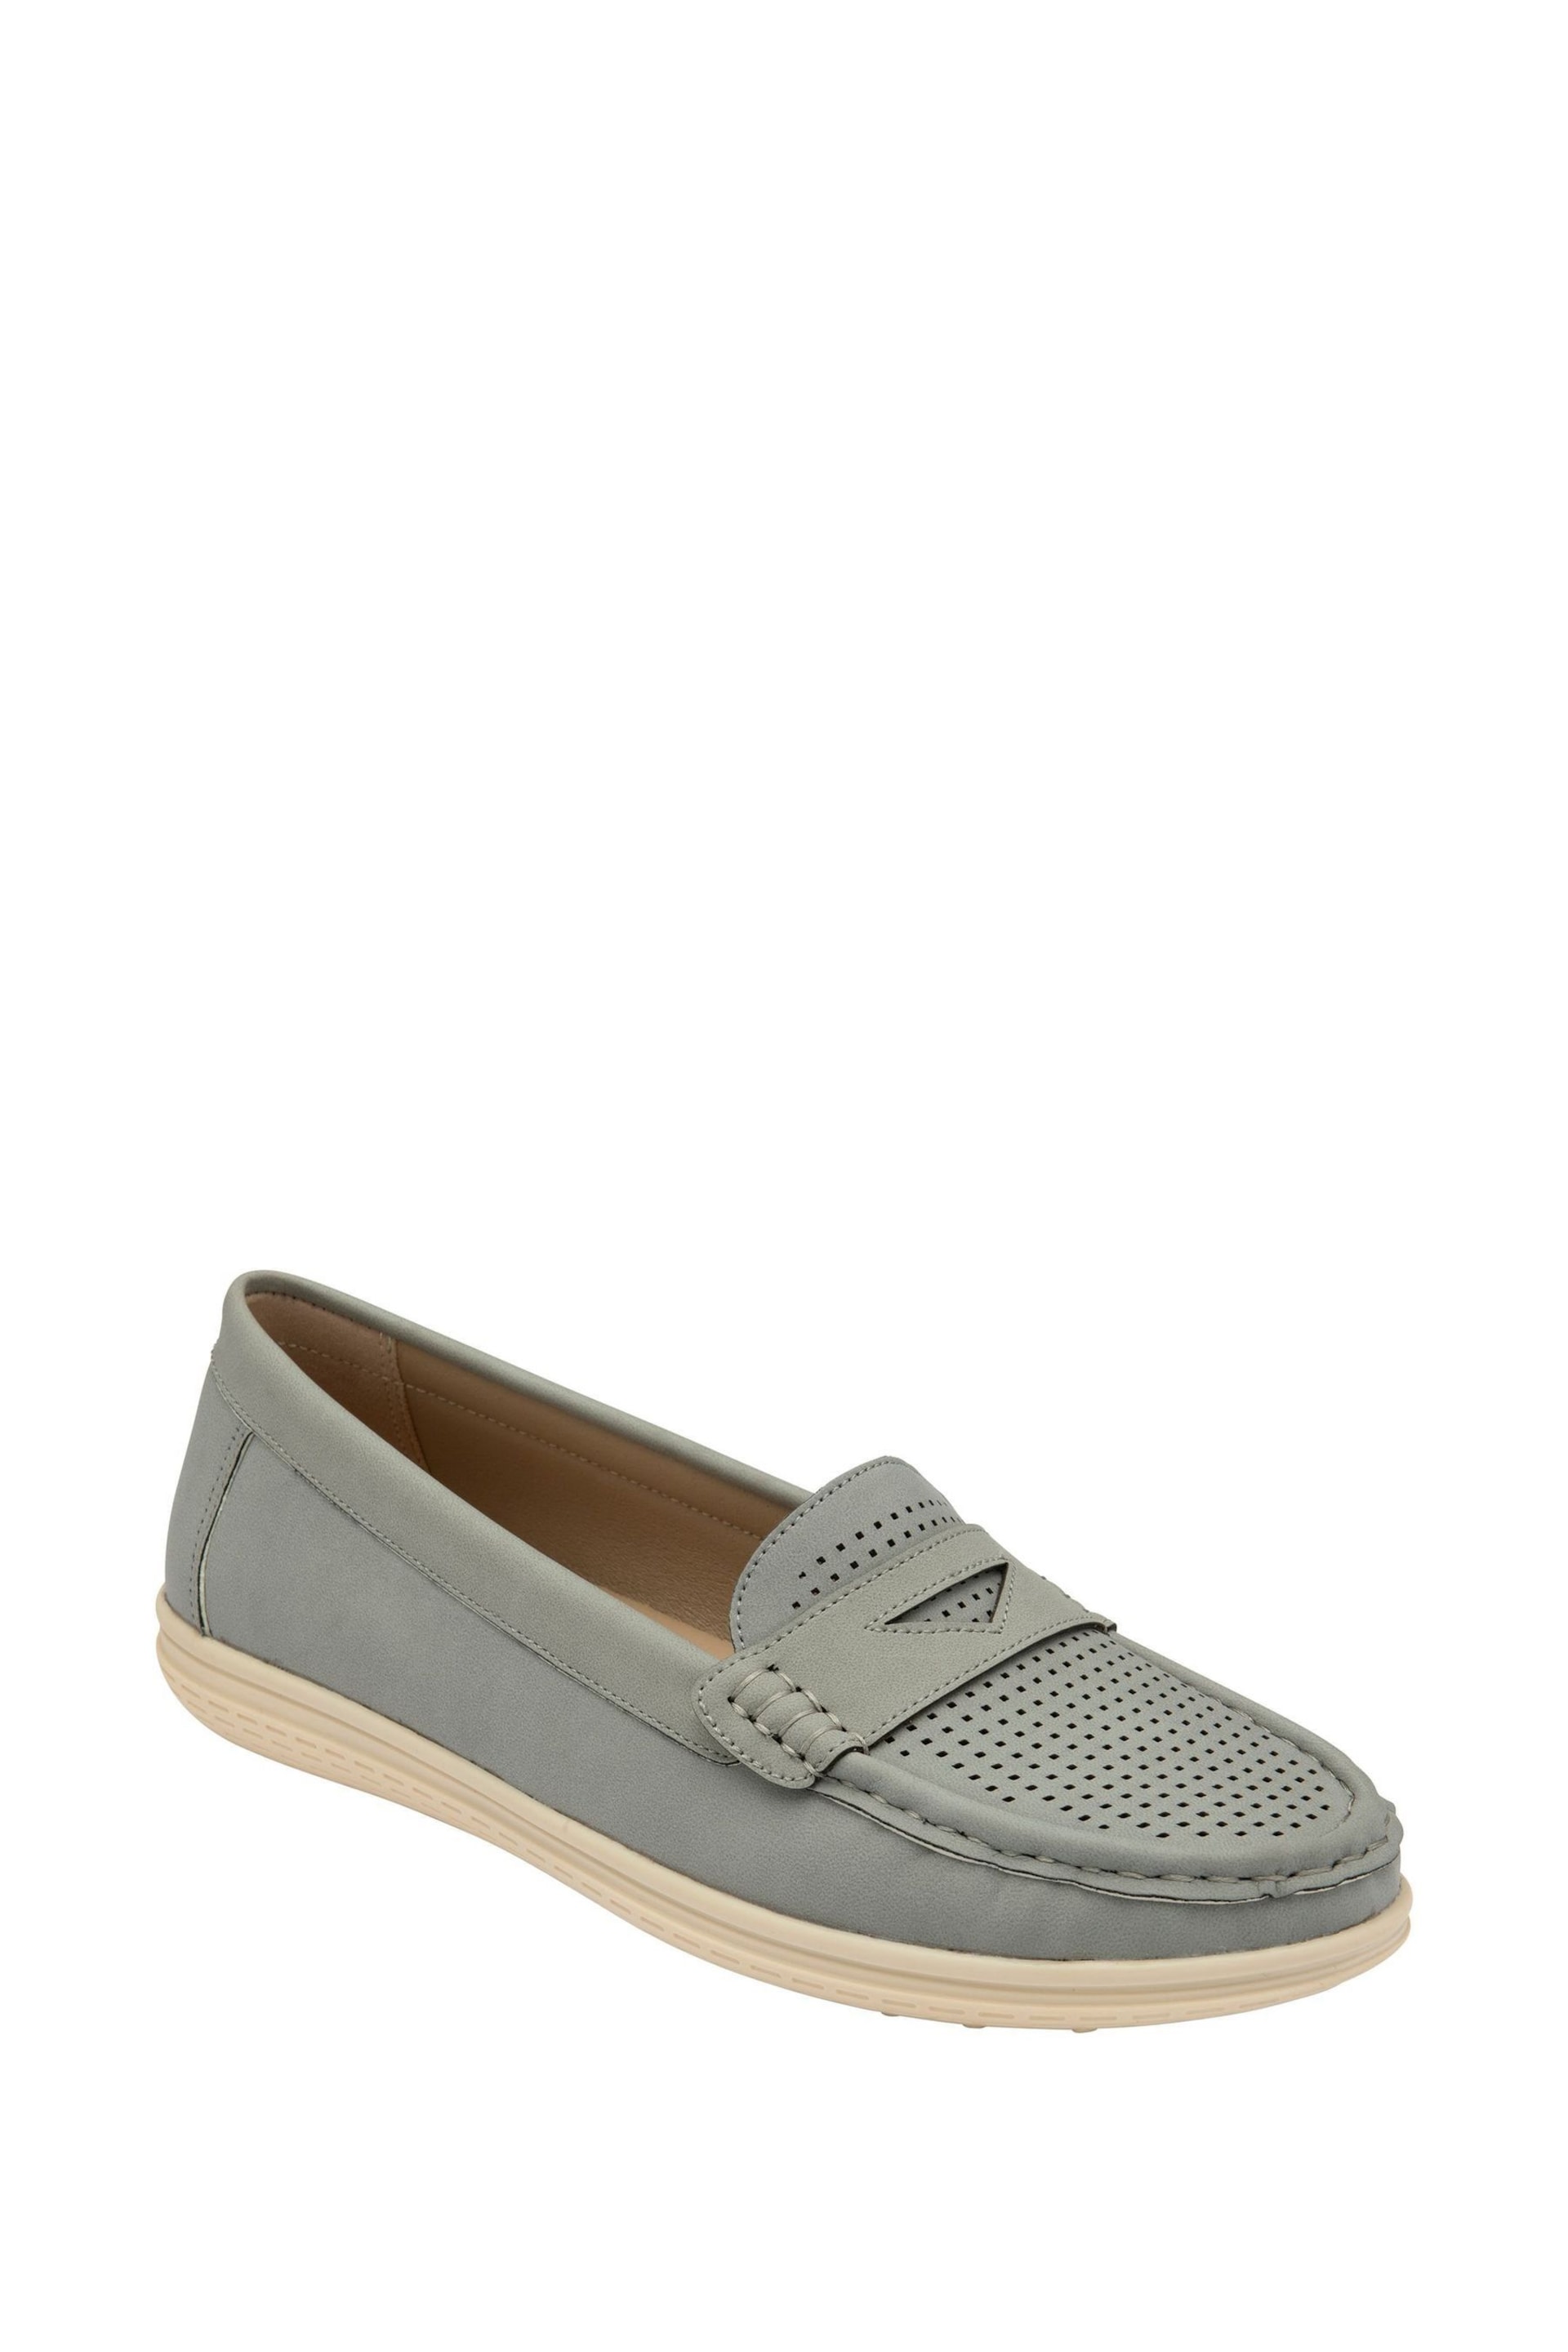 Lotus Grey Loafers - Image 1 of 4